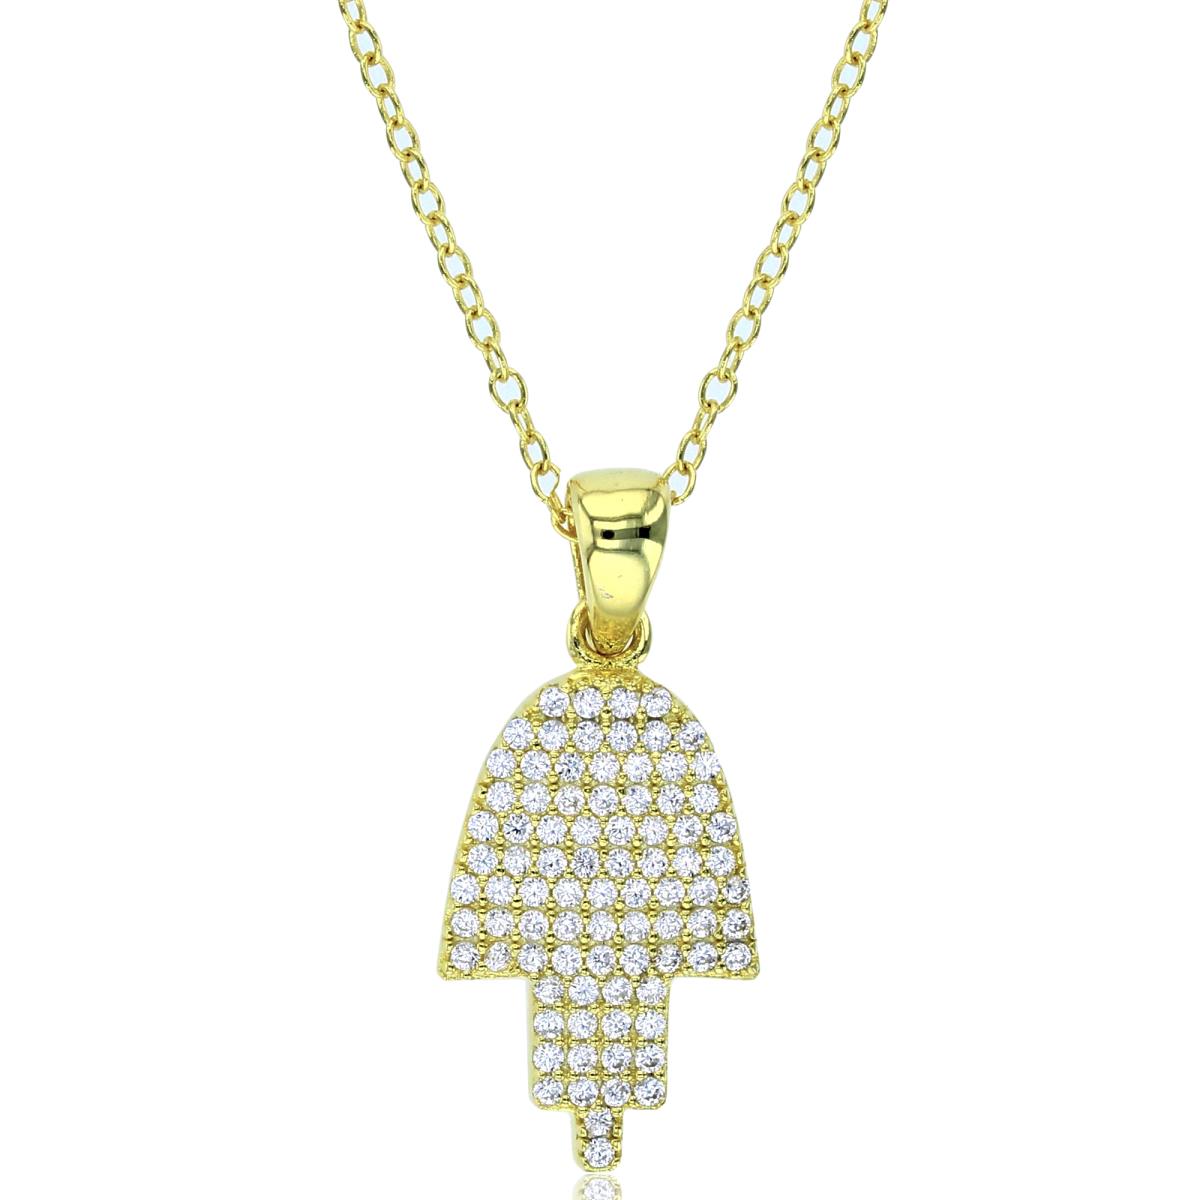 Sterling Silver+1Micron Yellow Gold Rnd CZ Micropave Hamsa18"Necklace